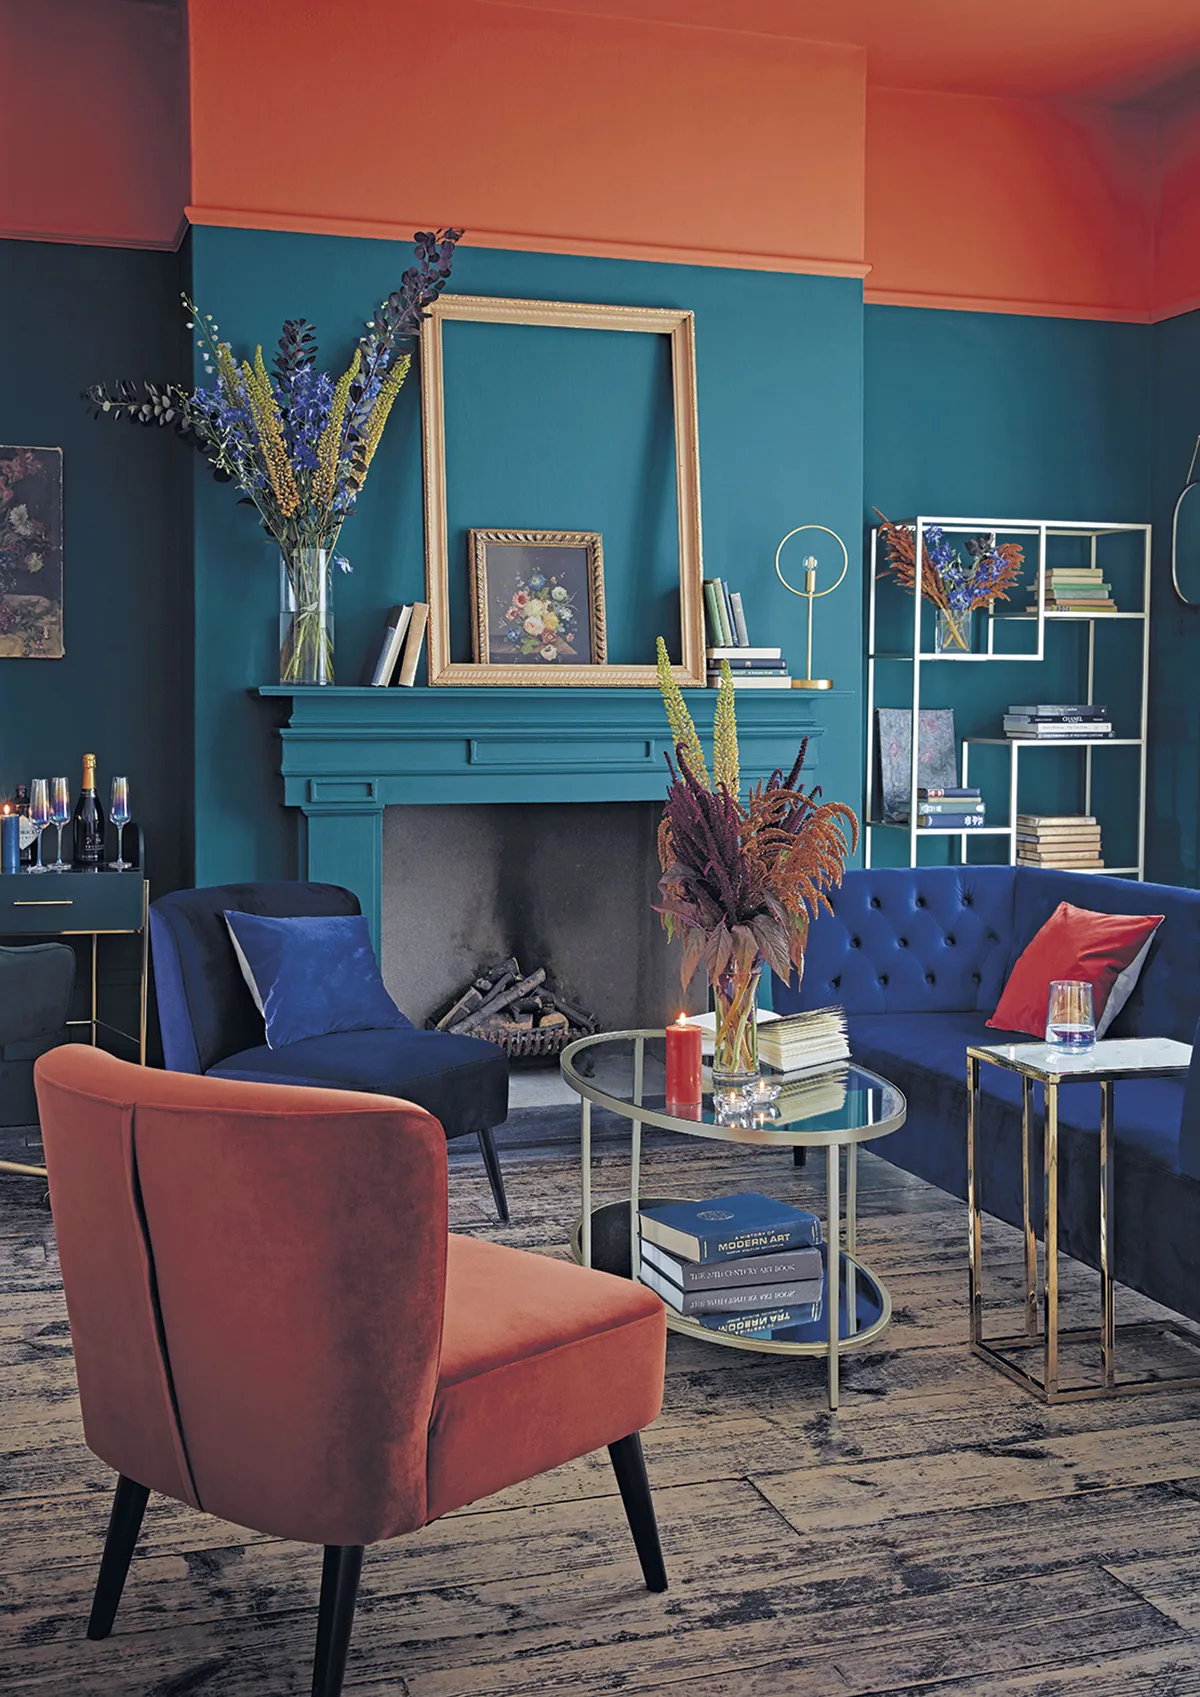 Chesterfield three-seater velvet sofa in blue, £500; Habitat Merlot velvet accent chair in orange and blue, £115 each; Dutch Glam glass coffee table, £250; Dutch Glam glass tall shelving, £350; Wilderness ring table lamp, £25; Dutch Glam boutique coffee table, £60, all Argos